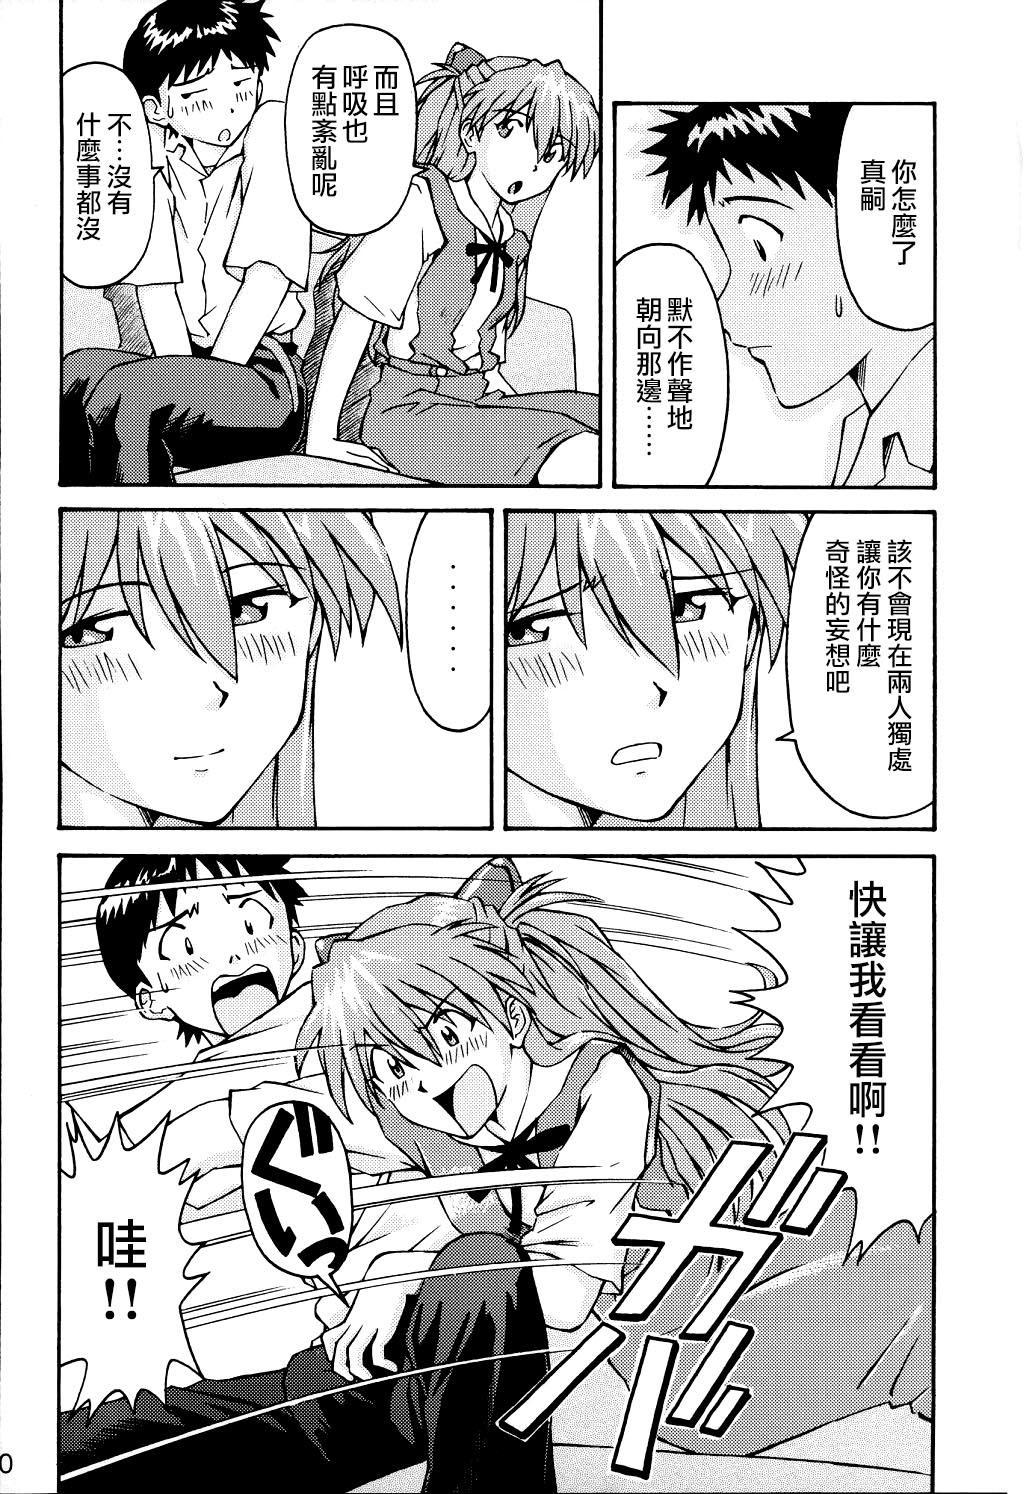 Pissing THE TOWERING INFERNO - Neon genesis evangelion Para - Page 9